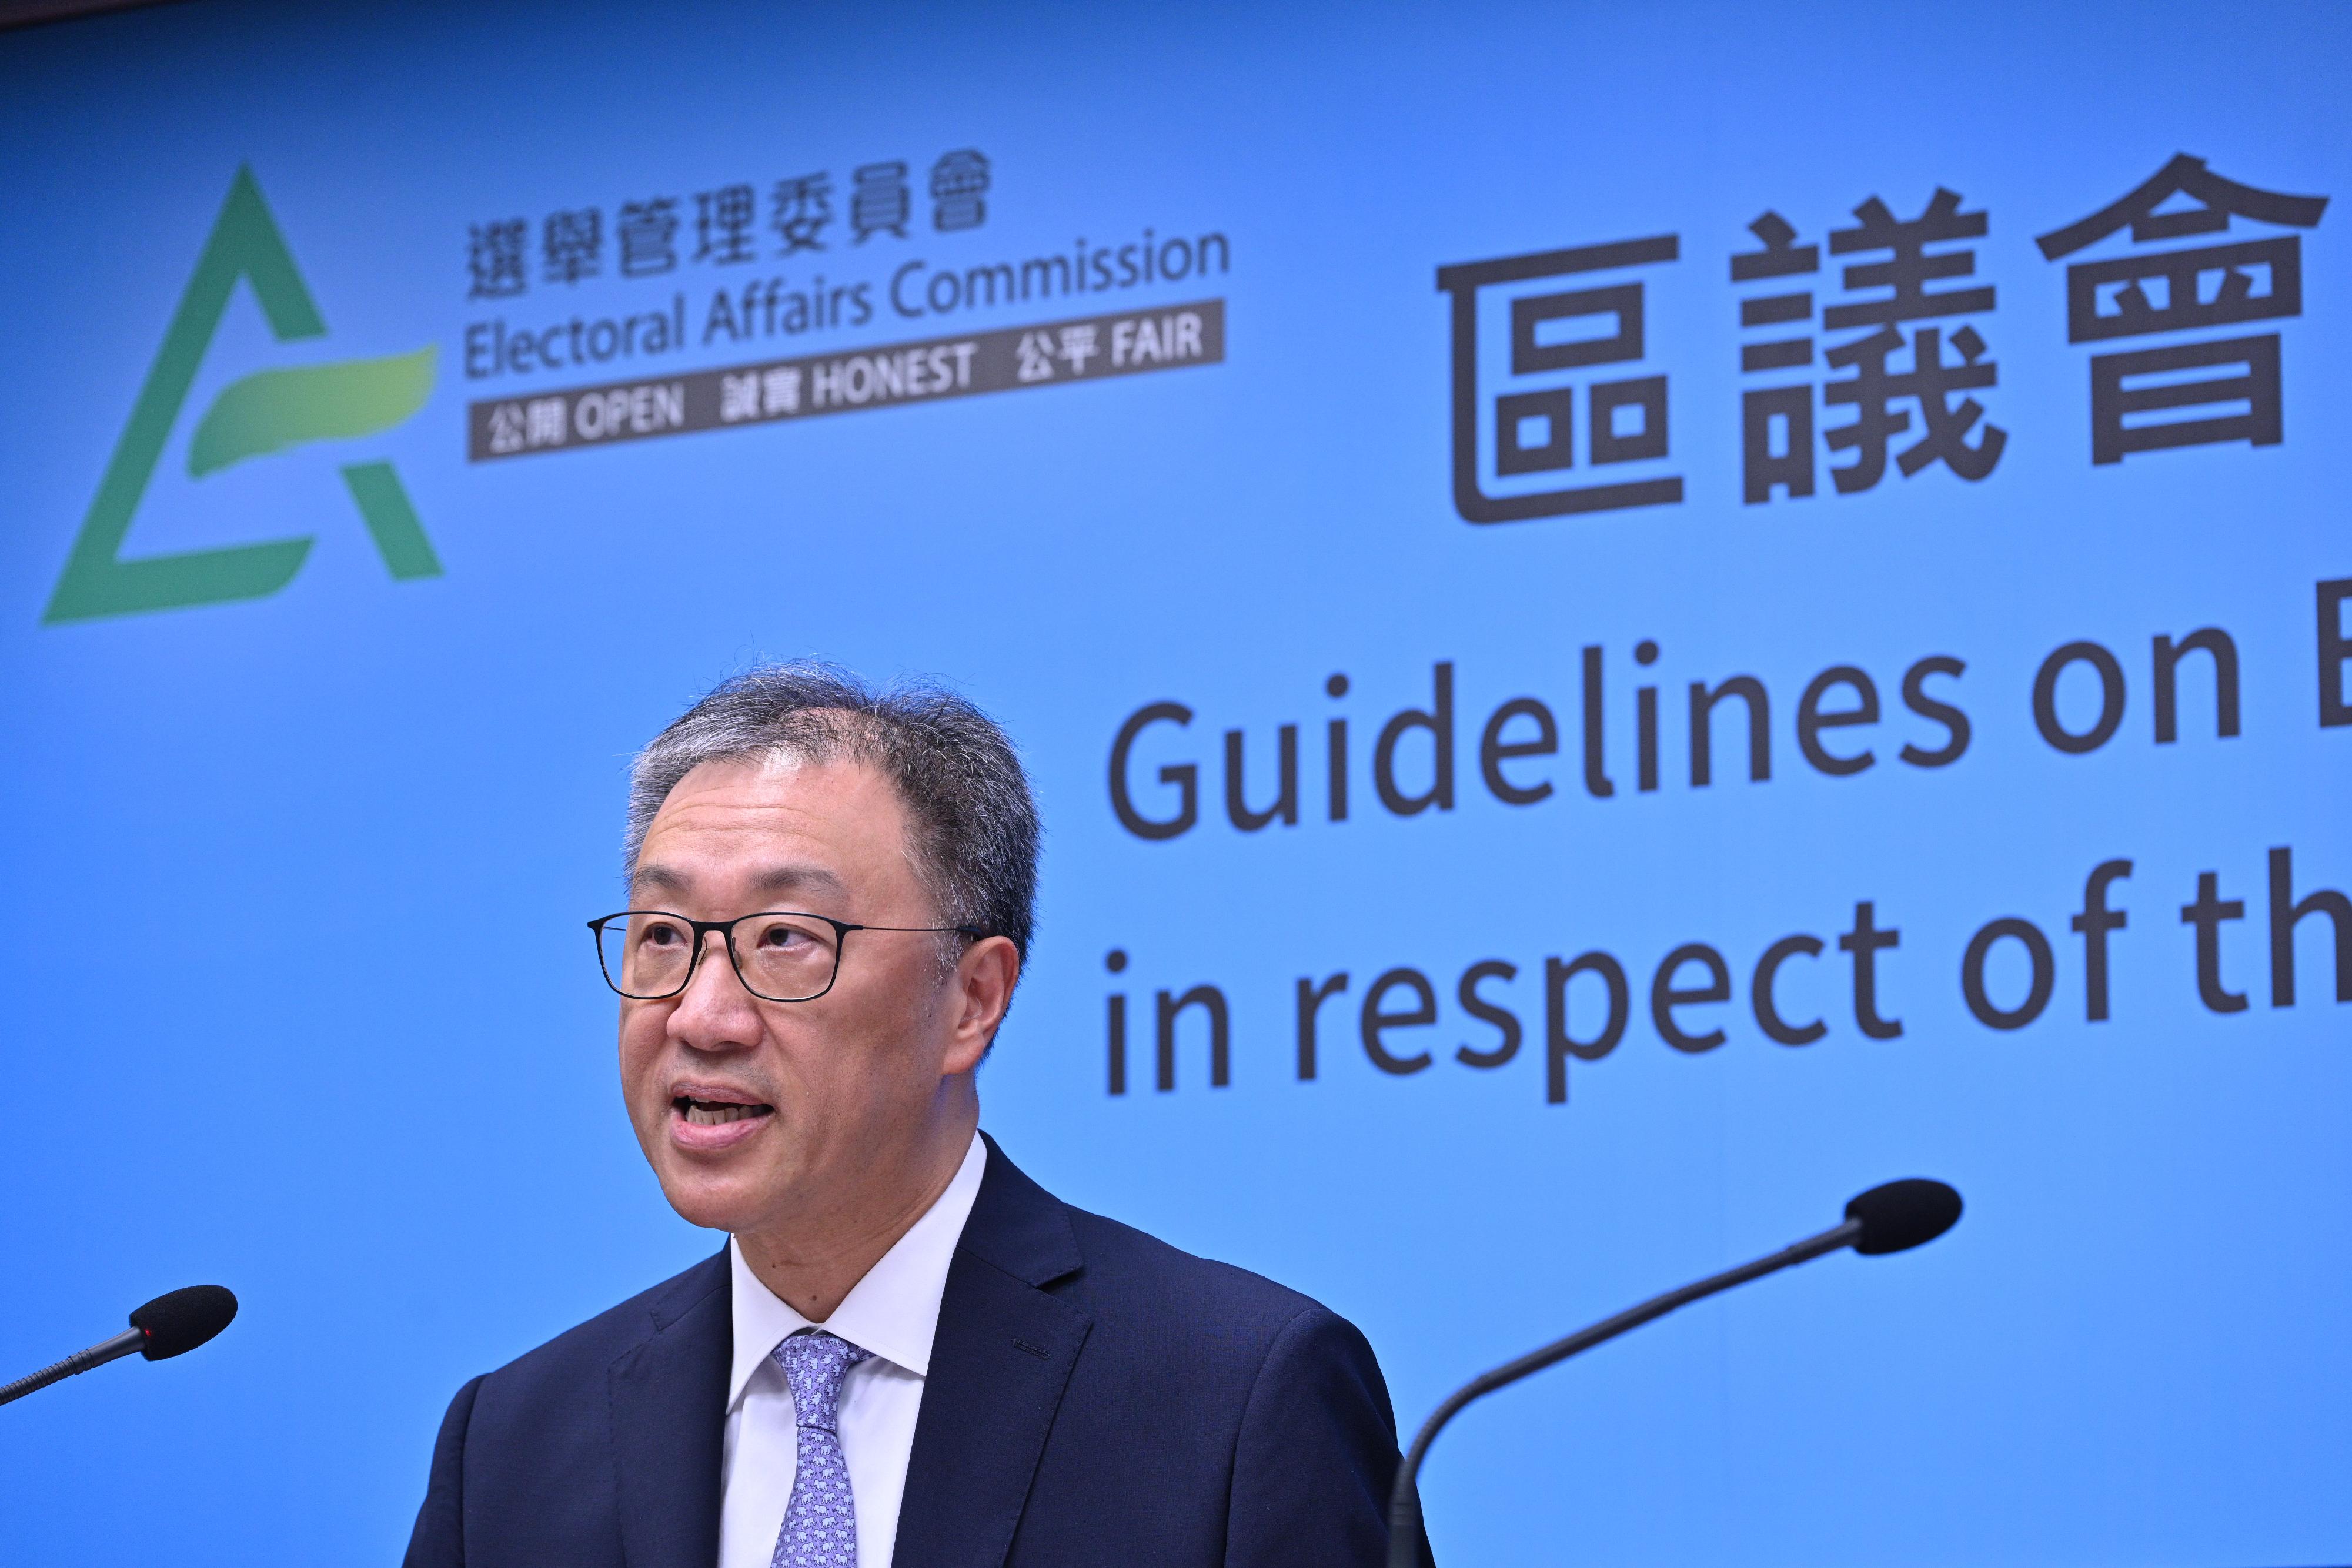 The Chairman of the Electoral Affairs Commission, Mr Justice David Lok, today (September 28) hosts the press conference on the Guidelines on Election-related Activities in respect of the District Council Election.